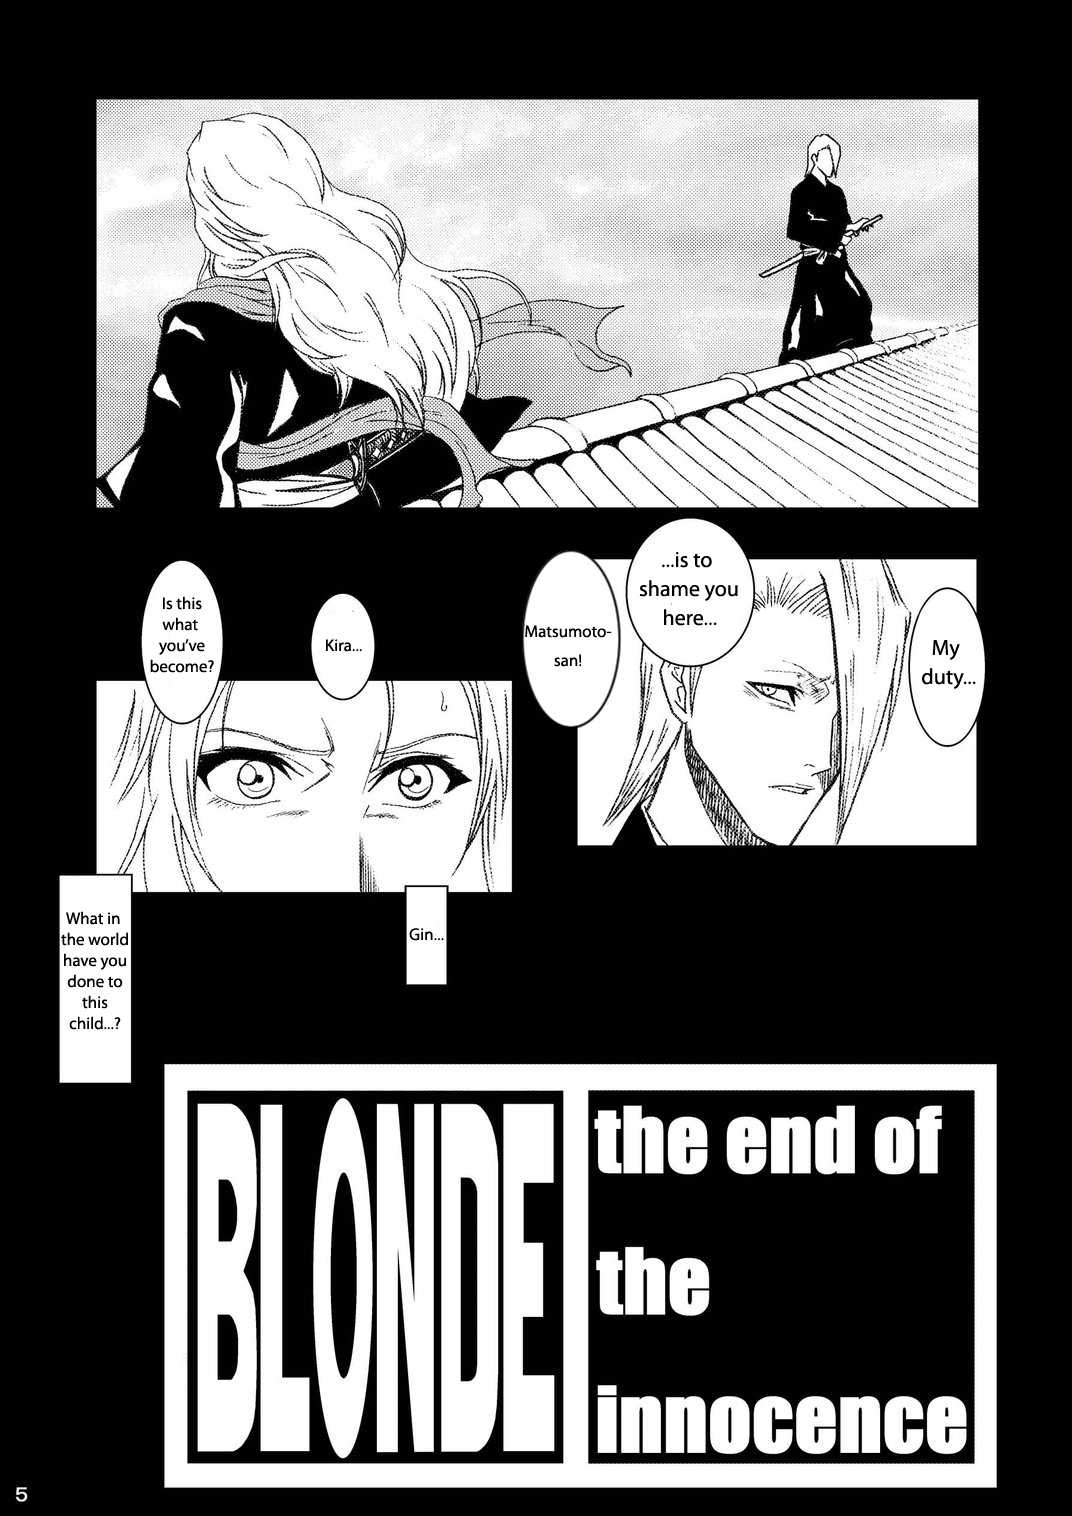 (SC31) [Atelier Pinpoint (CRACK)] Blonde - End of Innocence (Bleach) [ENG] (サンクリ31) [アトリエ ピン・ポイント (クラック)] 乱れ菊 (ブリーチ) [英訳]